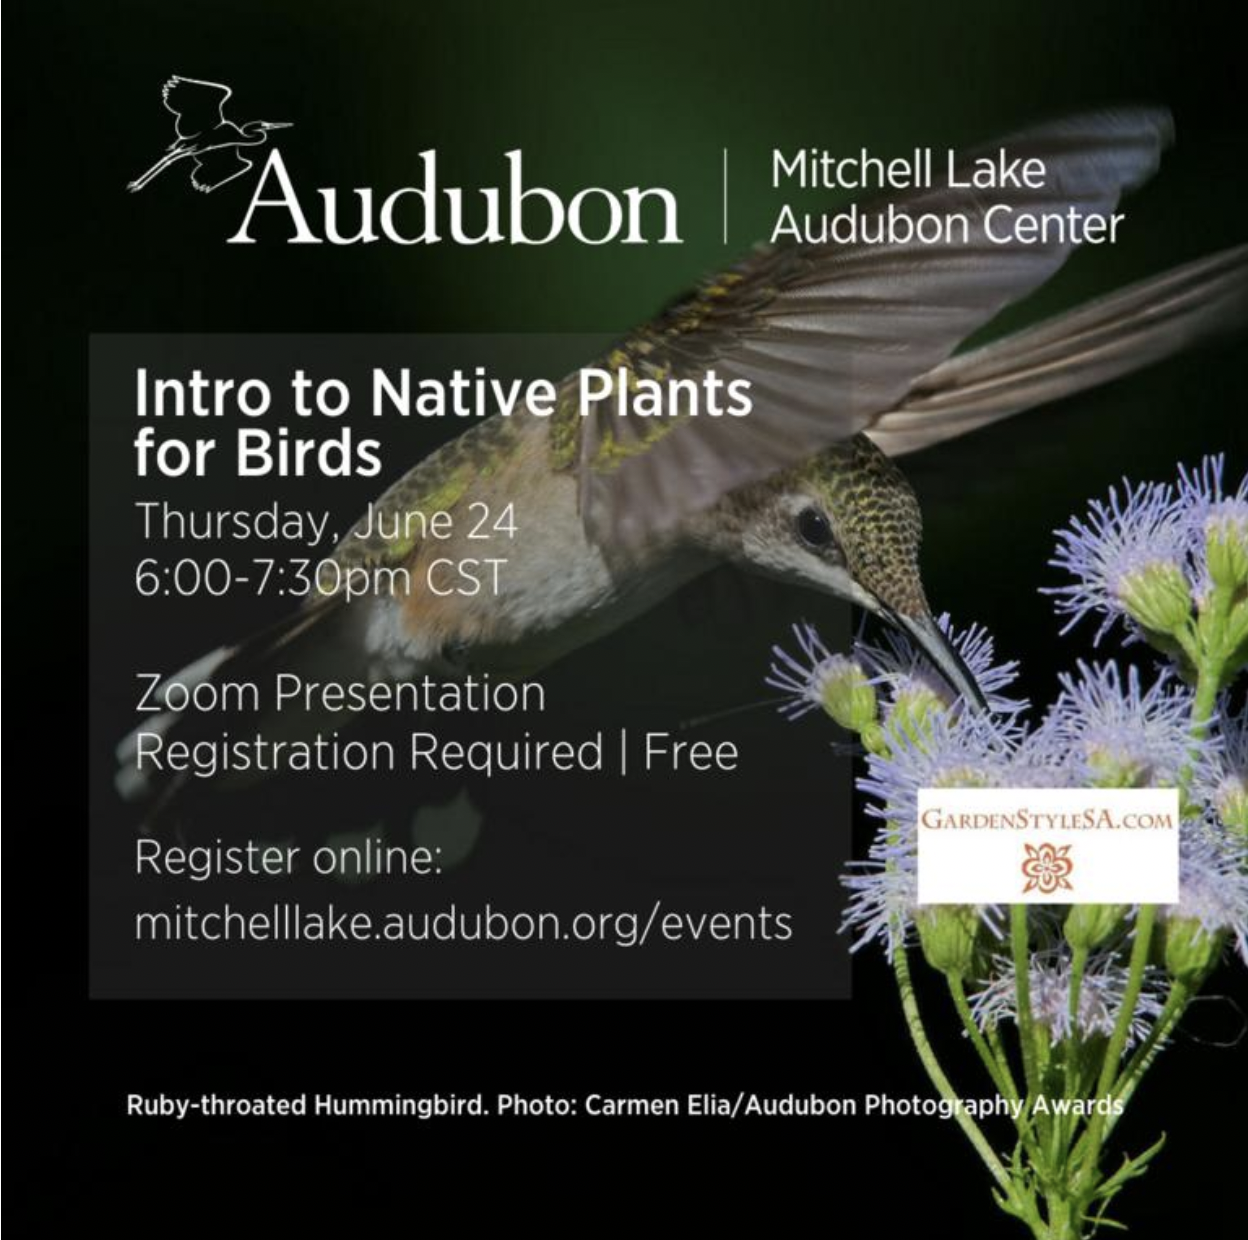 native plants for birds event